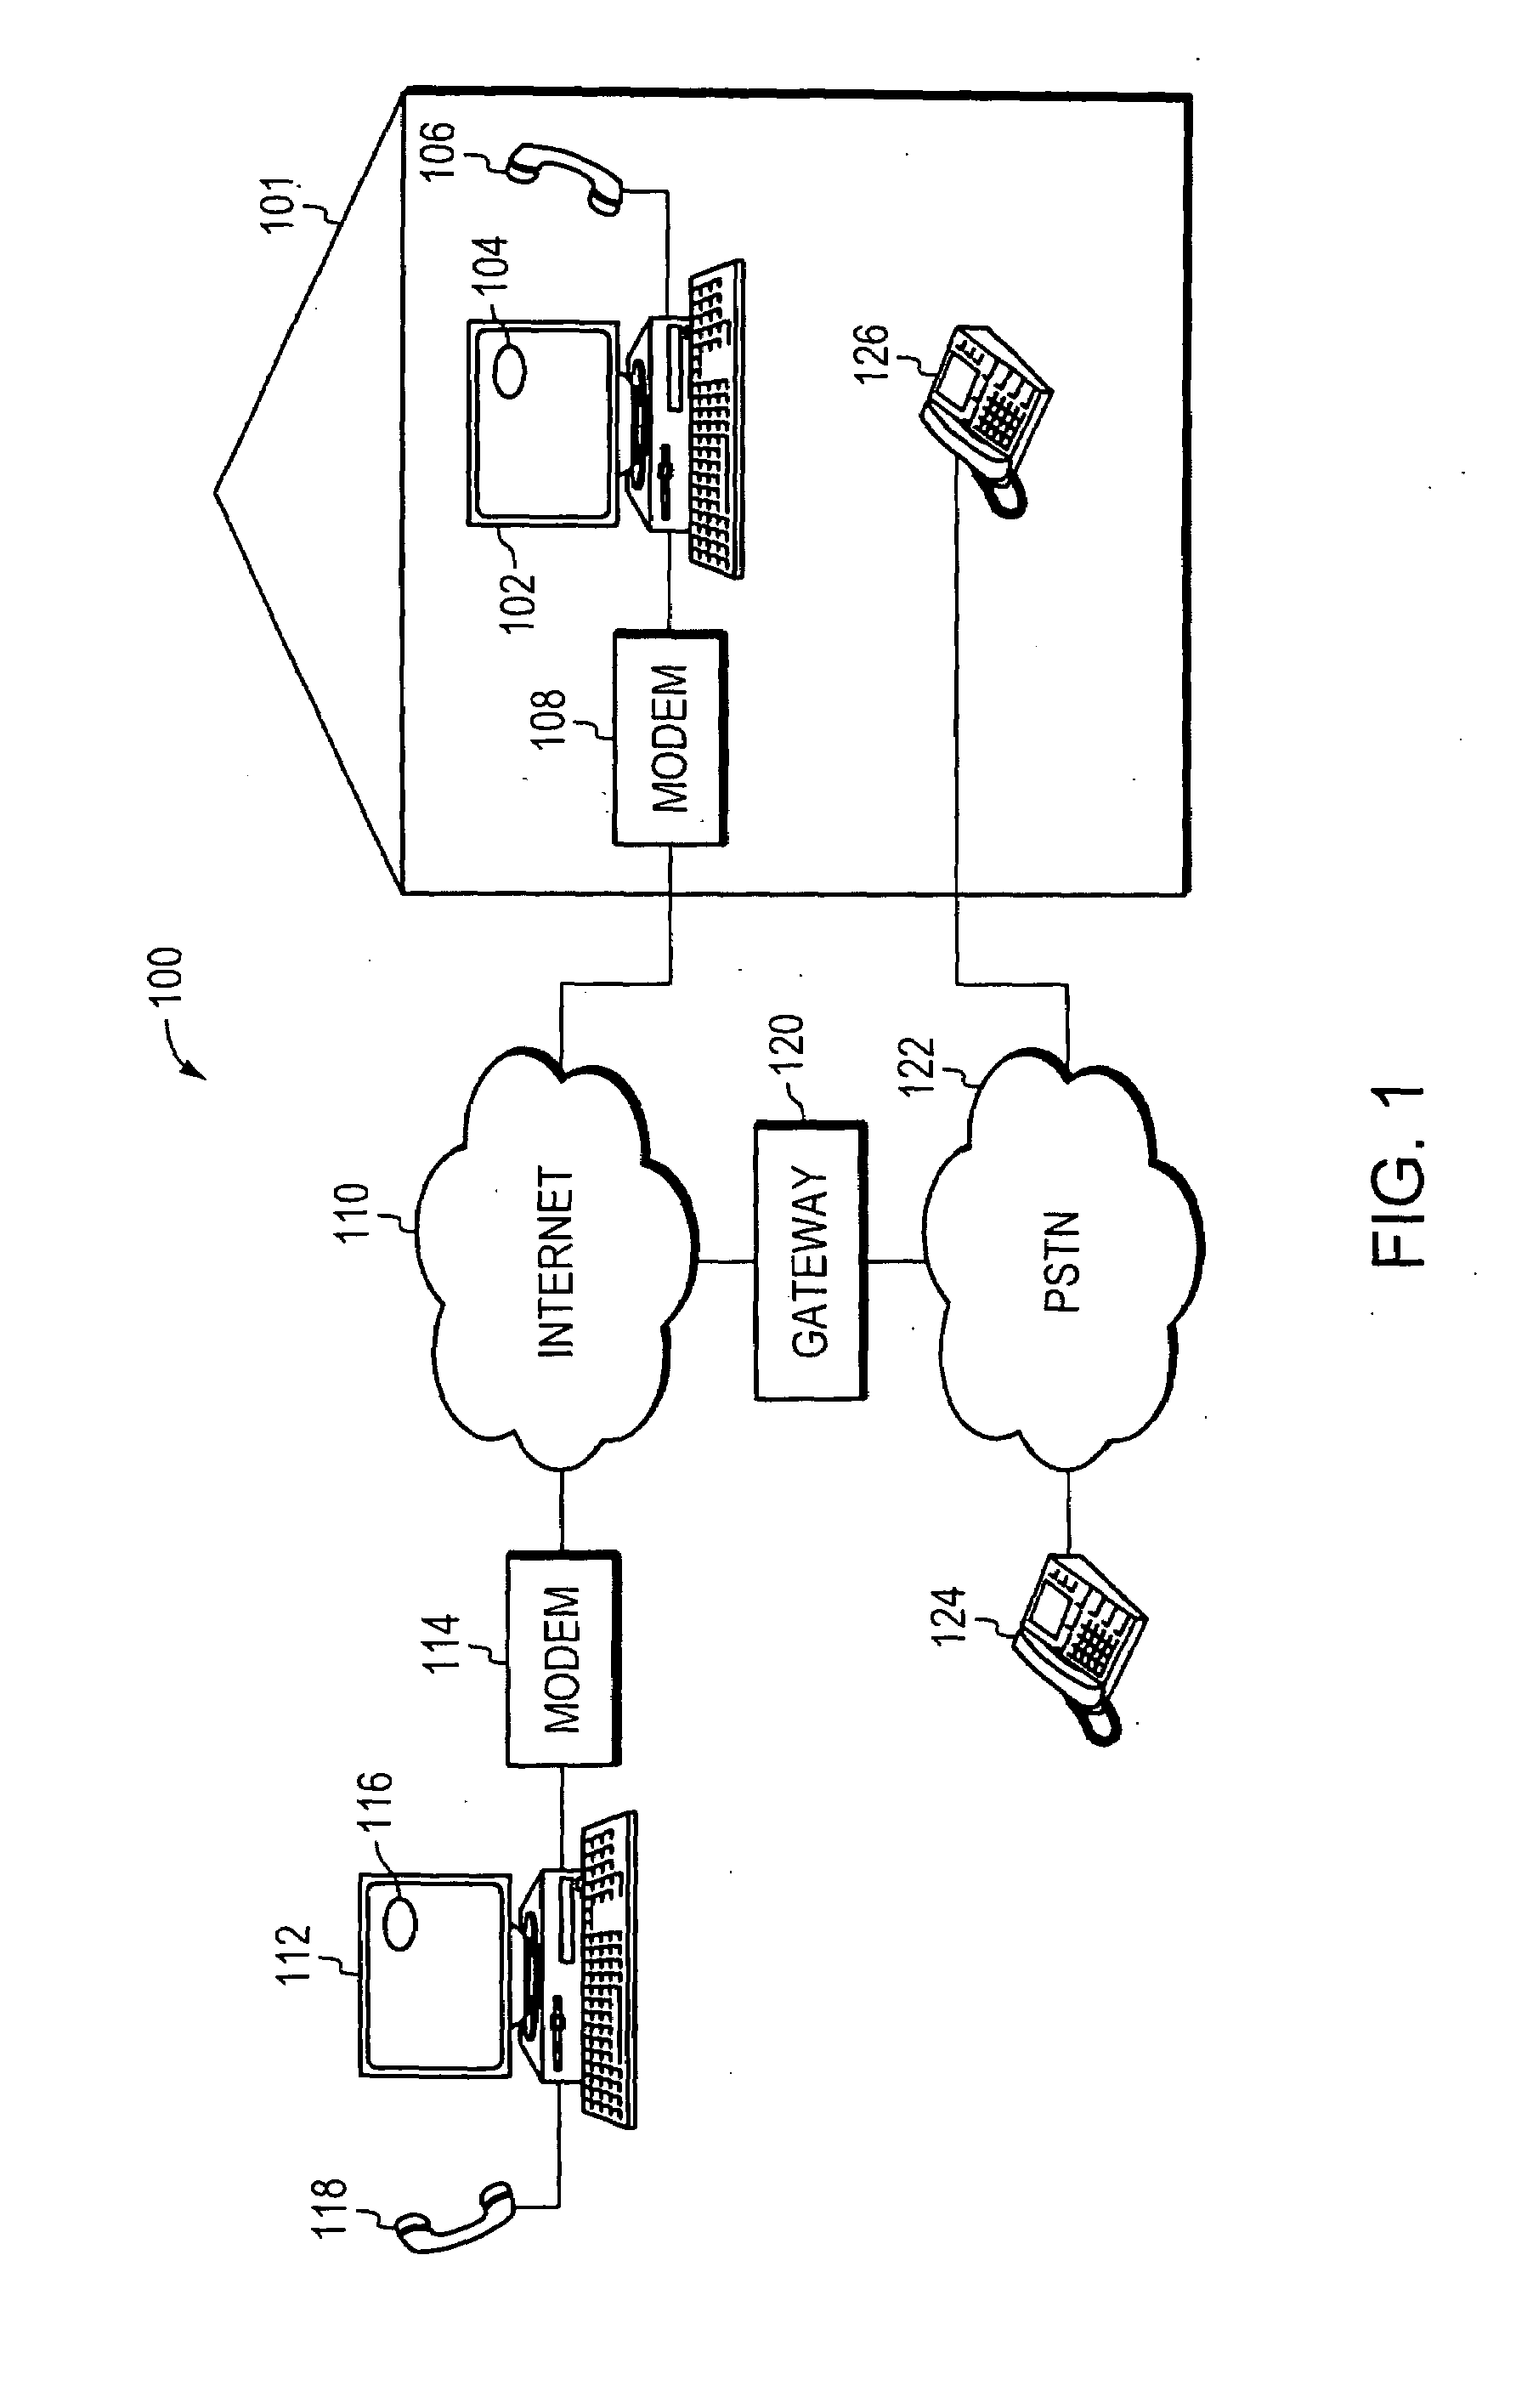 Dual-mode device for voice communication